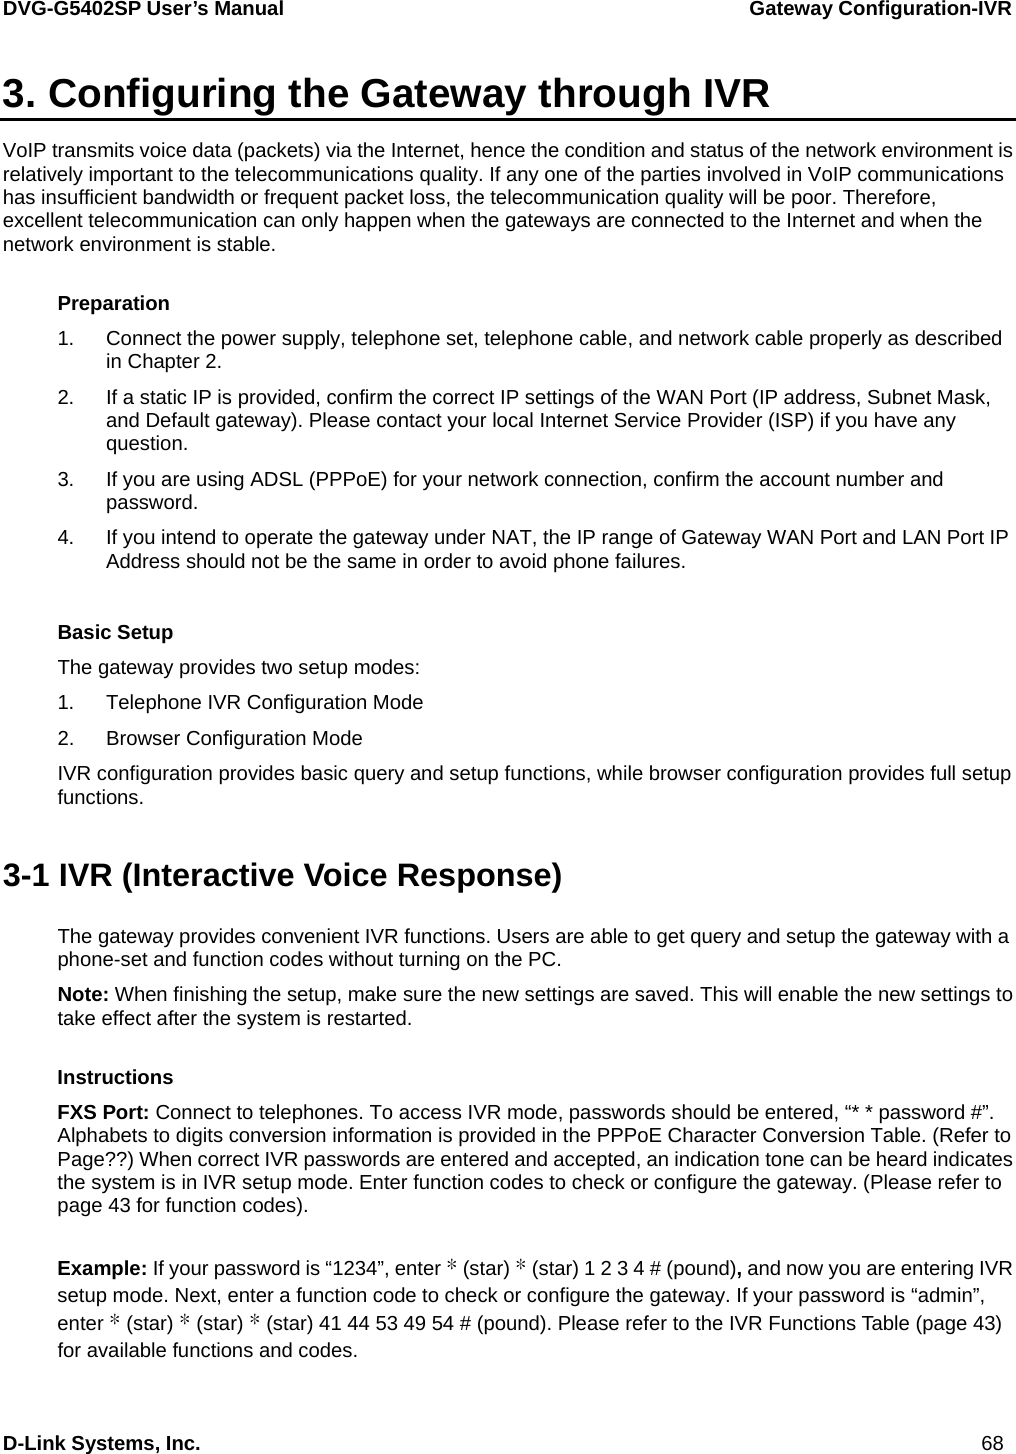 DVG-G5402SP User’s Manual                 Gateway Configuration-IVR D-Link Systems, Inc.                                                                             68 3. Configuring the Gateway through IVR VoIP transmits voice data (packets) via the Internet, hence the condition and status of the network environment is relatively important to the telecommunications quality. If any one of the parties involved in VoIP communications has insufficient bandwidth or frequent packet loss, the telecommunication quality will be poor. Therefore, excellent telecommunication can only happen when the gateways are connected to the Internet and when the network environment is stable.      Preparation 1.  Connect the power supply, telephone set, telephone cable, and network cable properly as described in Chapter 2. 2.  If a static IP is provided, confirm the correct IP settings of the WAN Port (IP address, Subnet Mask, and Default gateway). Please contact your local Internet Service Provider (ISP) if you have any question. 3.  If you are using ADSL (PPPoE) for your network connection, confirm the account number and password. 4.  If you intend to operate the gateway under NAT, the IP range of Gateway WAN Port and LAN Port IP Address should not be the same in order to avoid phone failures.  Basic Setup The gateway provides two setup modes:   1.  Telephone IVR Configuration Mode 2.  Browser Configuration Mode IVR configuration provides basic query and setup functions, while browser configuration provides full setup functions.  3-1 IVR (Interactive Voice Response) The gateway provides convenient IVR functions. Users are able to get query and setup the gateway with a phone-set and function codes without turning on the PC. Note: When finishing the setup, make sure the new settings are saved. This will enable the new settings to take effect after the system is restarted.  Instructions FXS Port: Connect to telephones. To access IVR mode, passwords should be entered, “* * password #”. Alphabets to digits conversion information is provided in the PPPoE Character Conversion Table. (Refer to Page??) When correct IVR passwords are entered and accepted, an indication tone can be heard indicates the system is in IVR setup mode. Enter function codes to check or configure the gateway. (Please refer to page 43 for function codes).  Example: If your password is “1234”, enter * (star) * (star) 1 2 3 4 # (pound), and now you are entering IVR setup mode. Next, enter a function code to check or configure the gateway. If your password is “admin”, enter * (star) * (star) * (star) 41 44 53 49 54 # (pound). Please refer to the IVR Functions Table (page 43) for available functions and codes. 